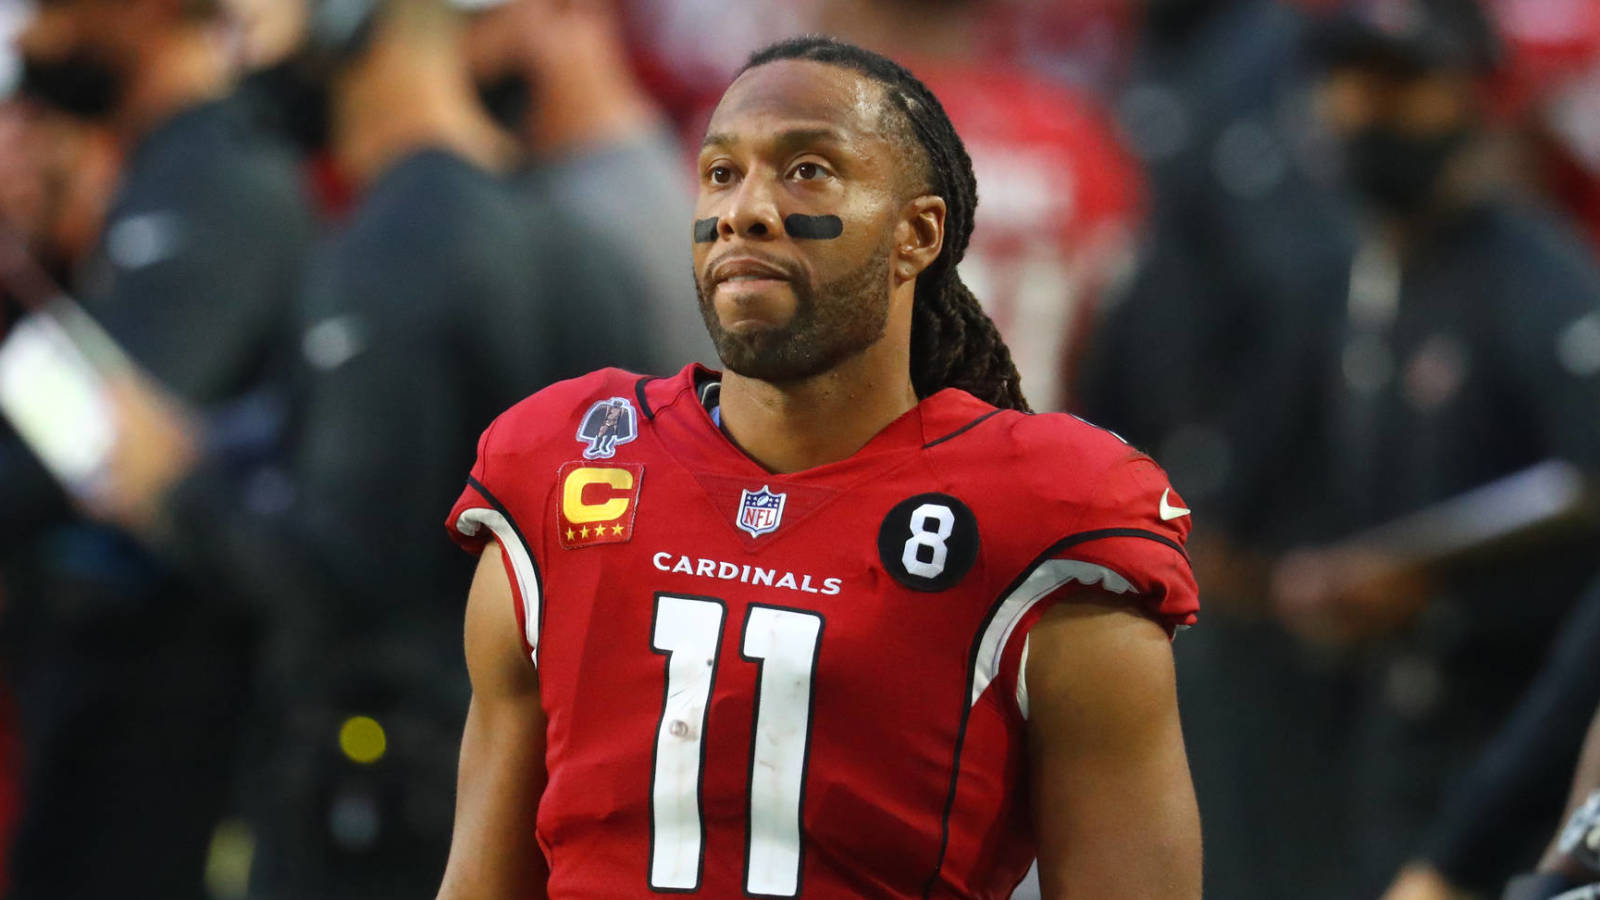 Larry Fitzgerald Net Worth 2022: How much does Larry Fitzgerald Make a Year?